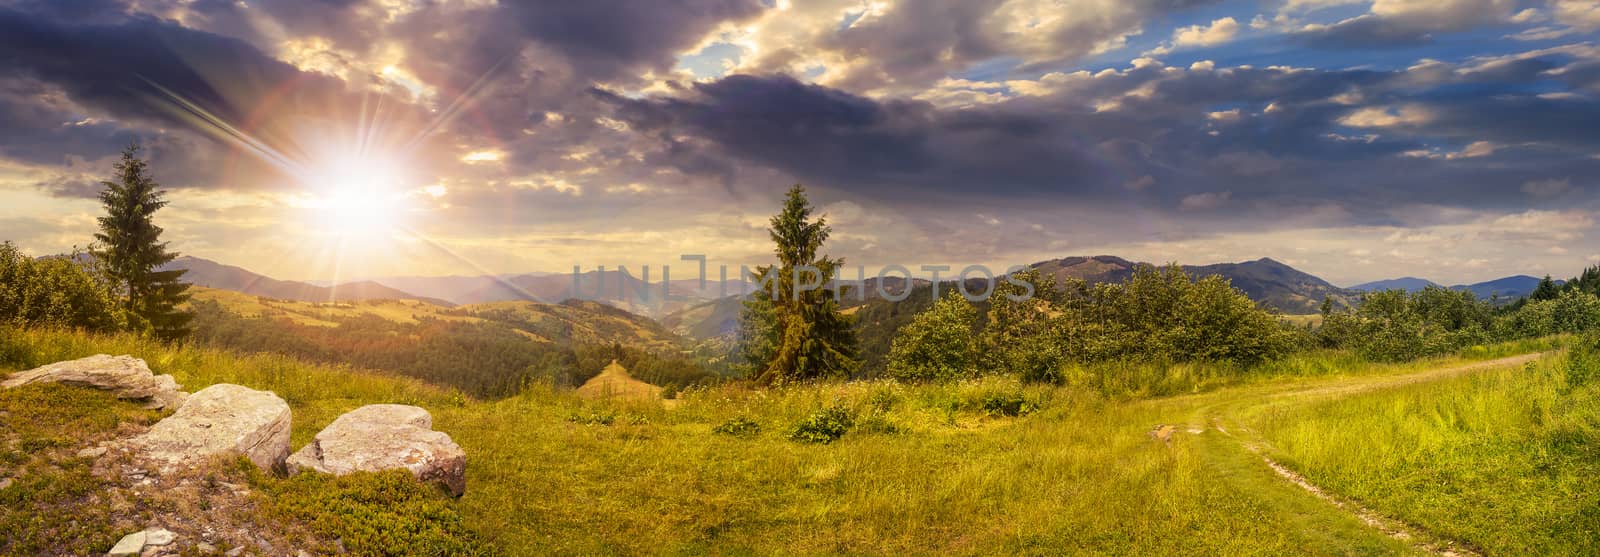 pnoramic collage  landscape. boulders on the meadow with path on the hillside and two pine trees on top of mountain range in sunset light